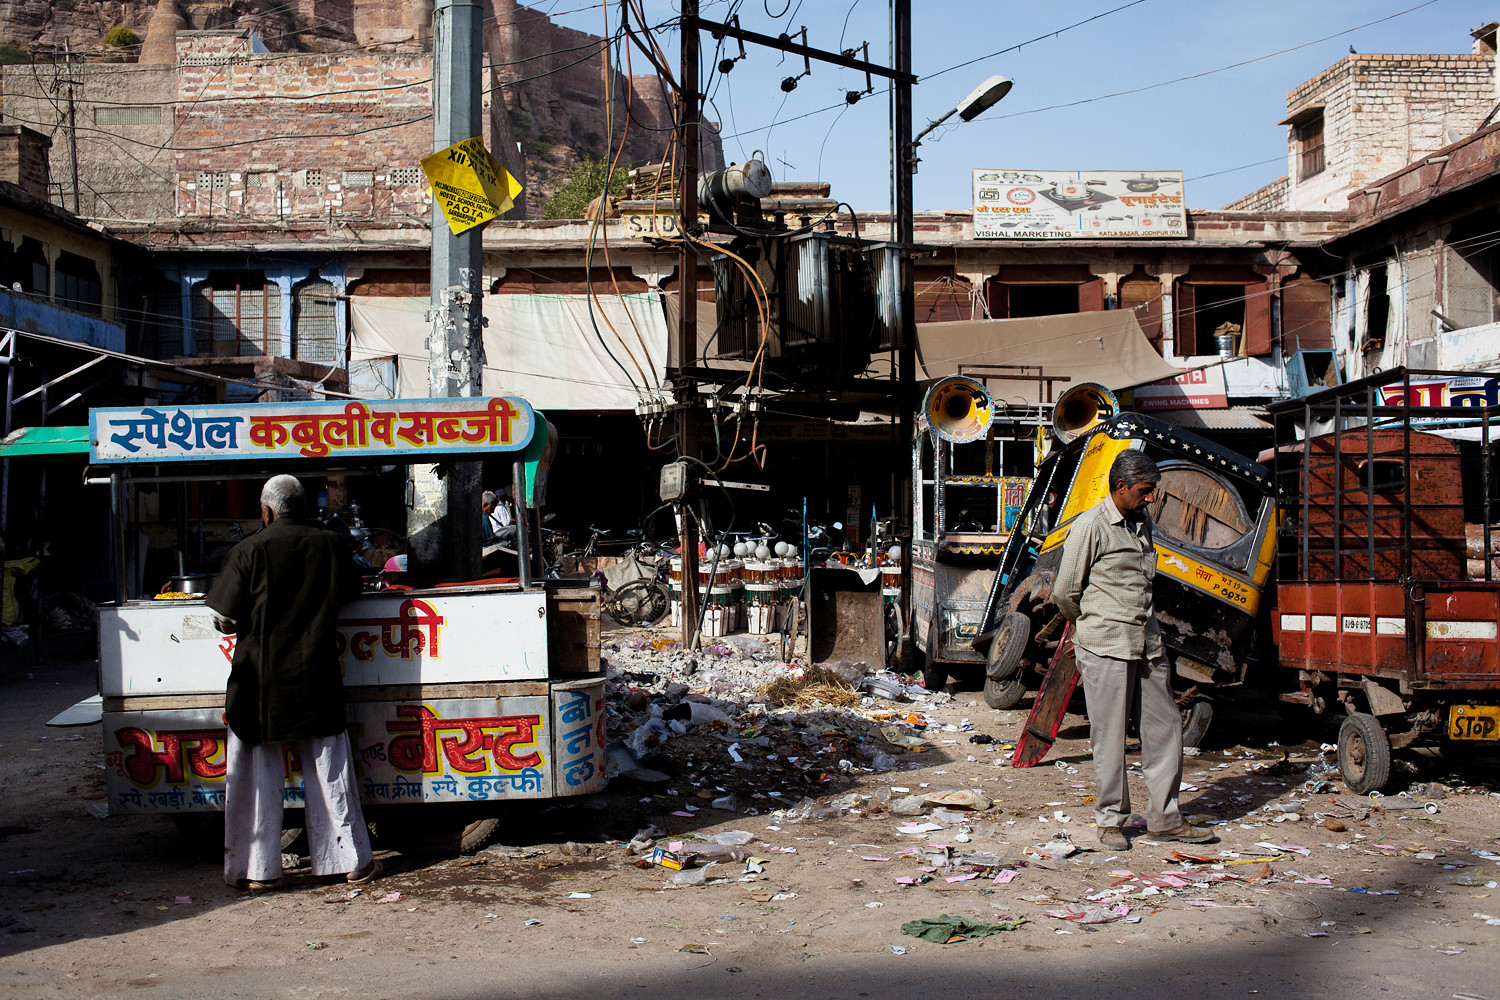 vendor and trash on a street in India